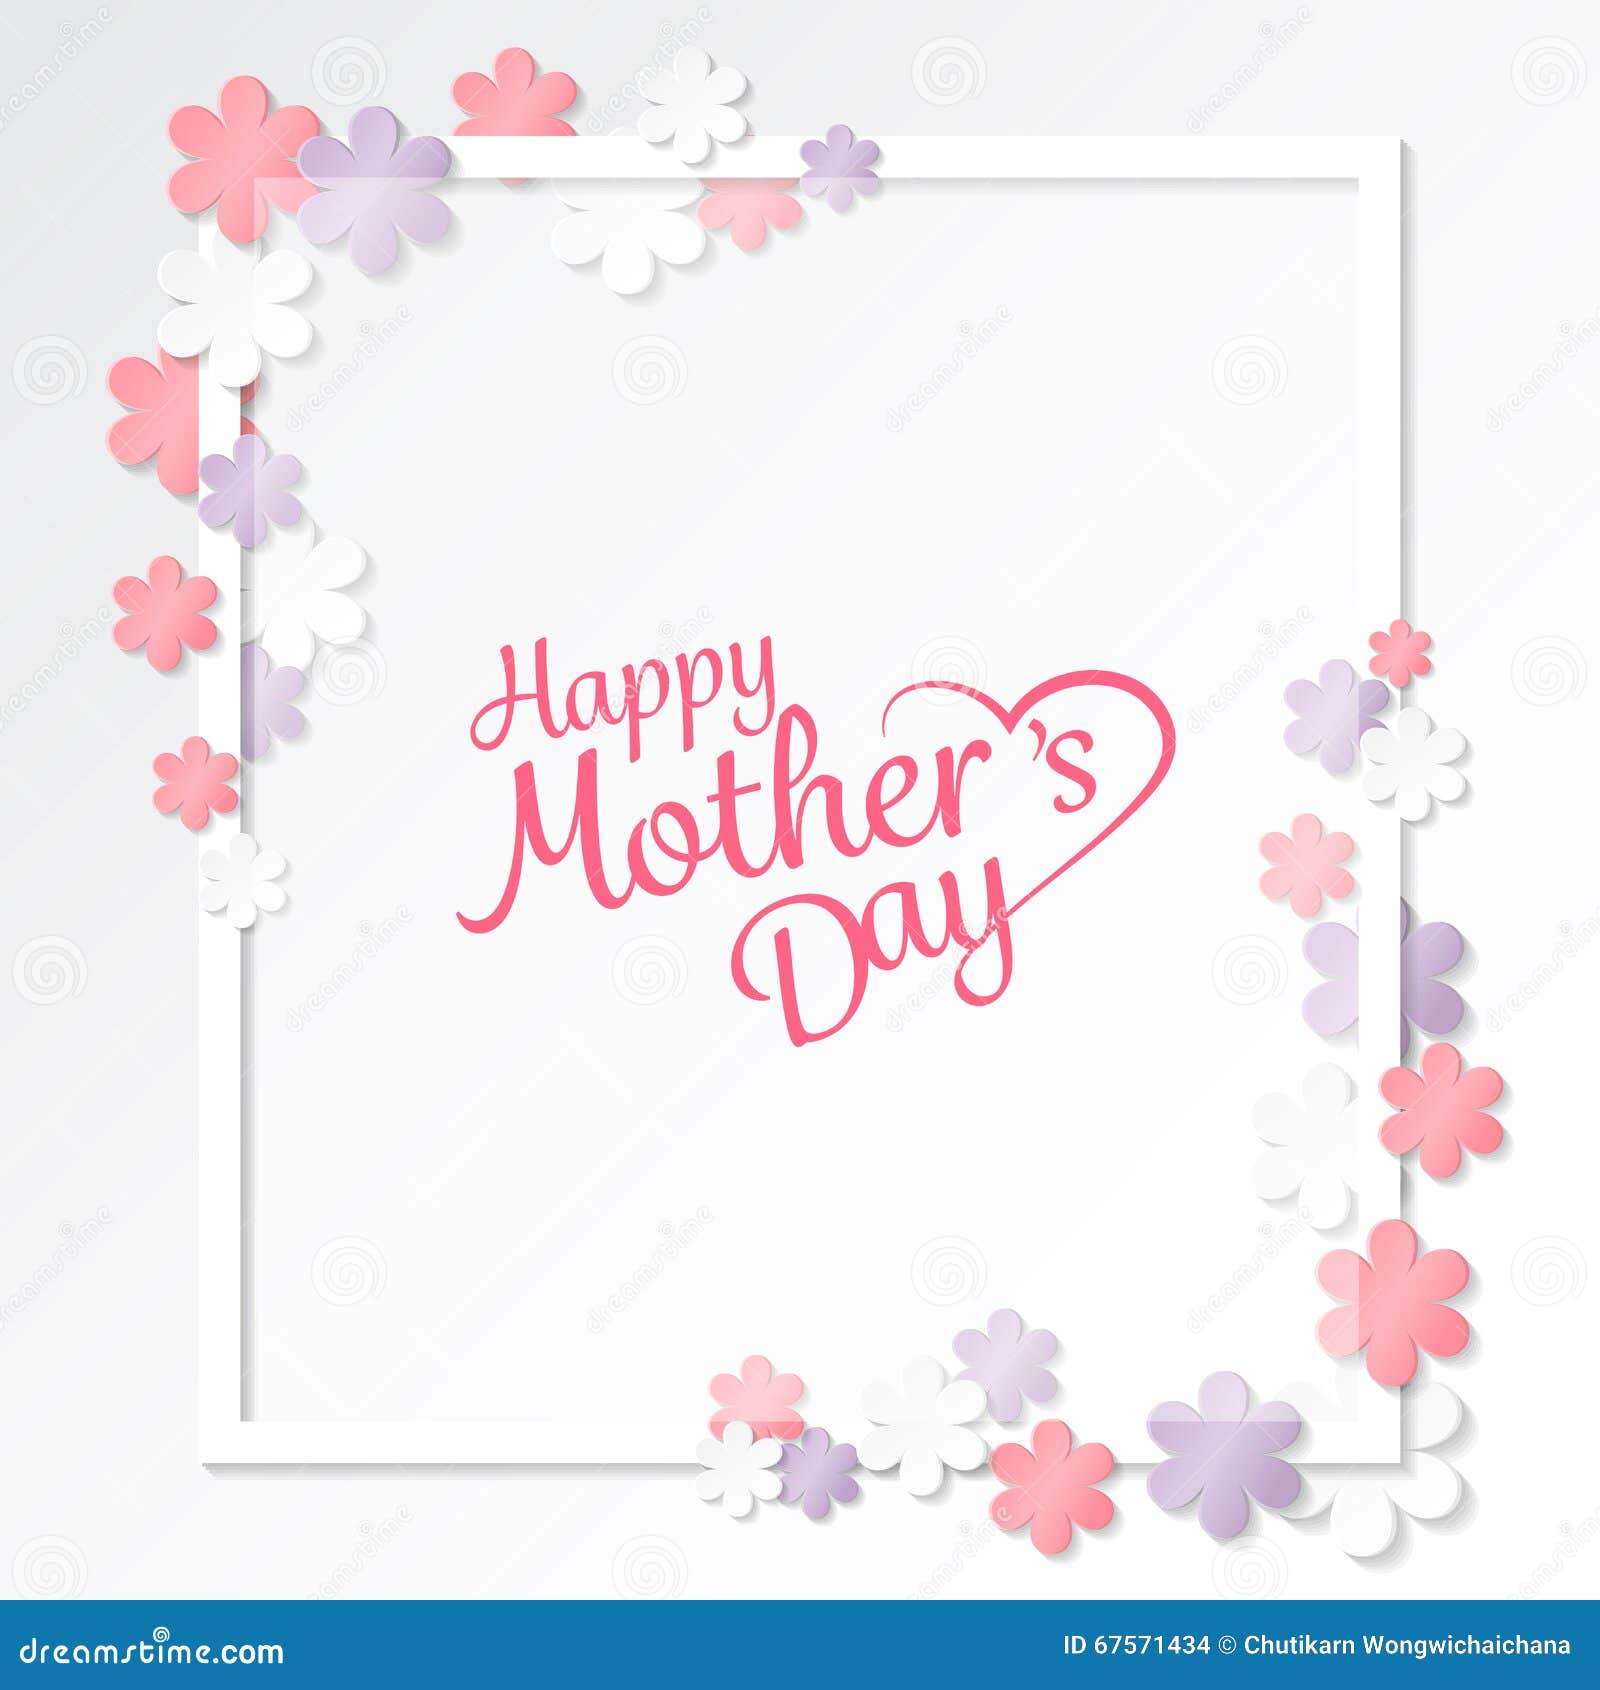 Mother S Day Background. Vector Stock Vector - Illustration of lady ...